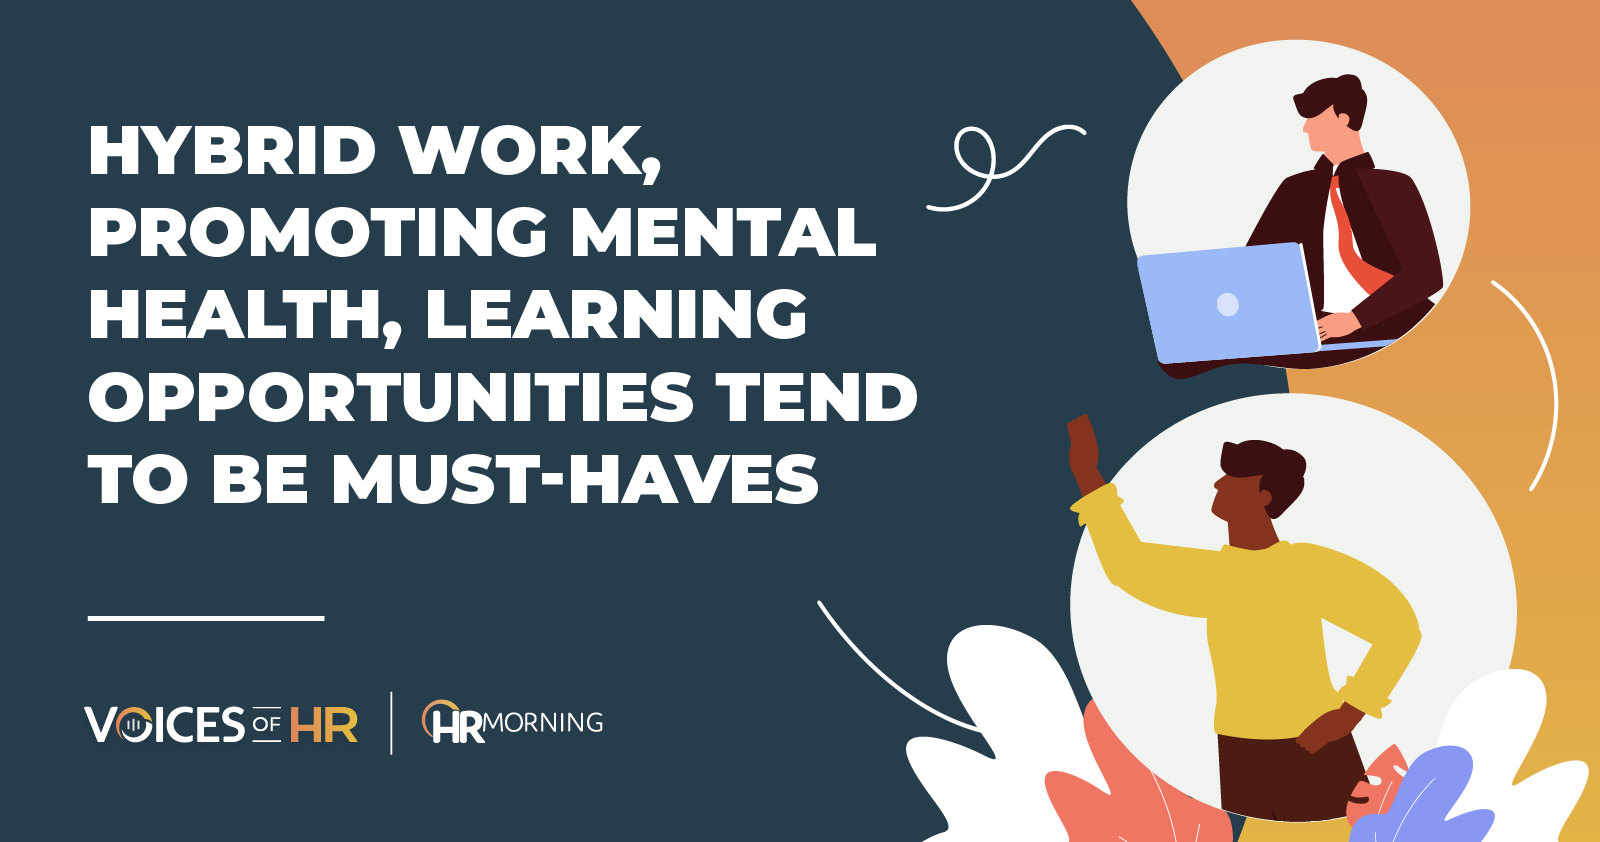 Hybrid work, promoting mental health, learning opportunities tend to be must-haves